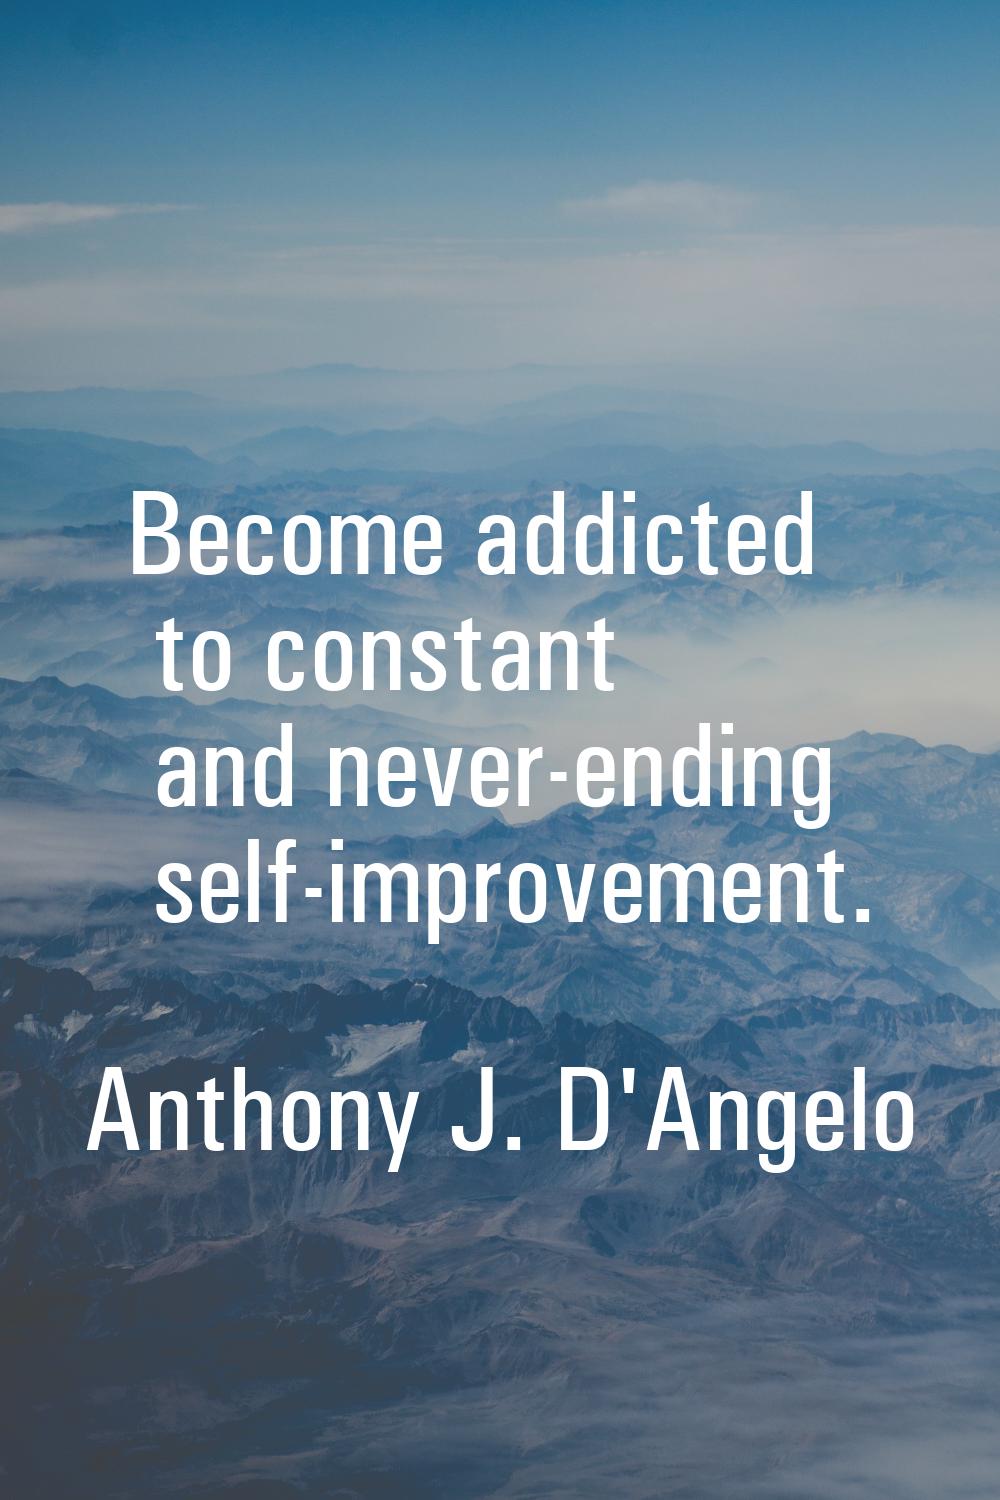 Become addicted to constant and never-ending self-improvement.